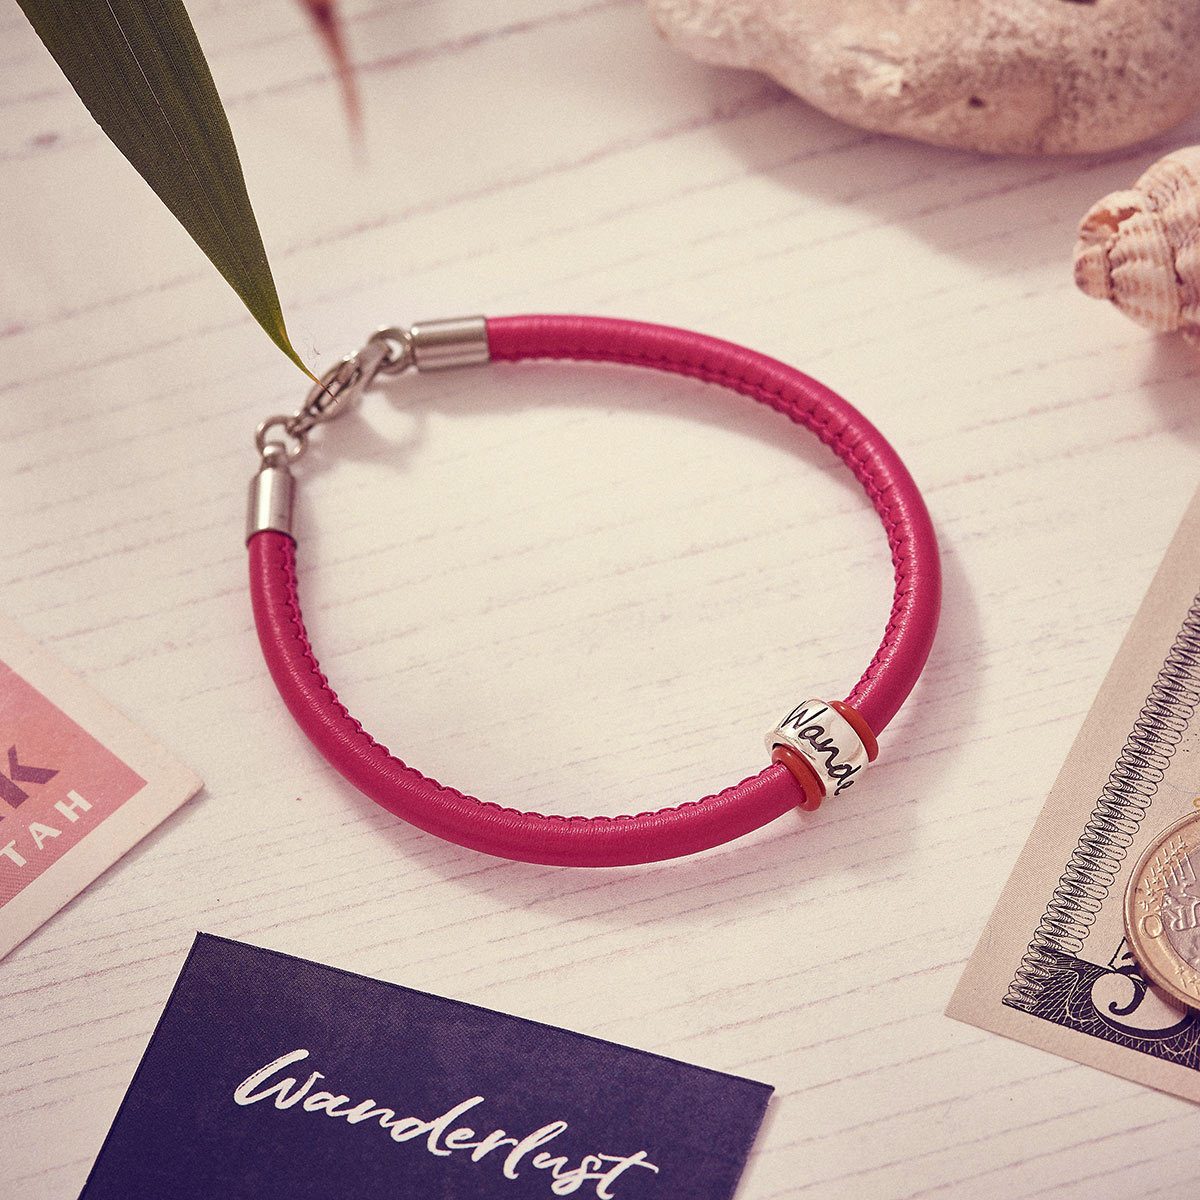 ladies pink leather bracelet with wanderlust bead unusual travel gift for her